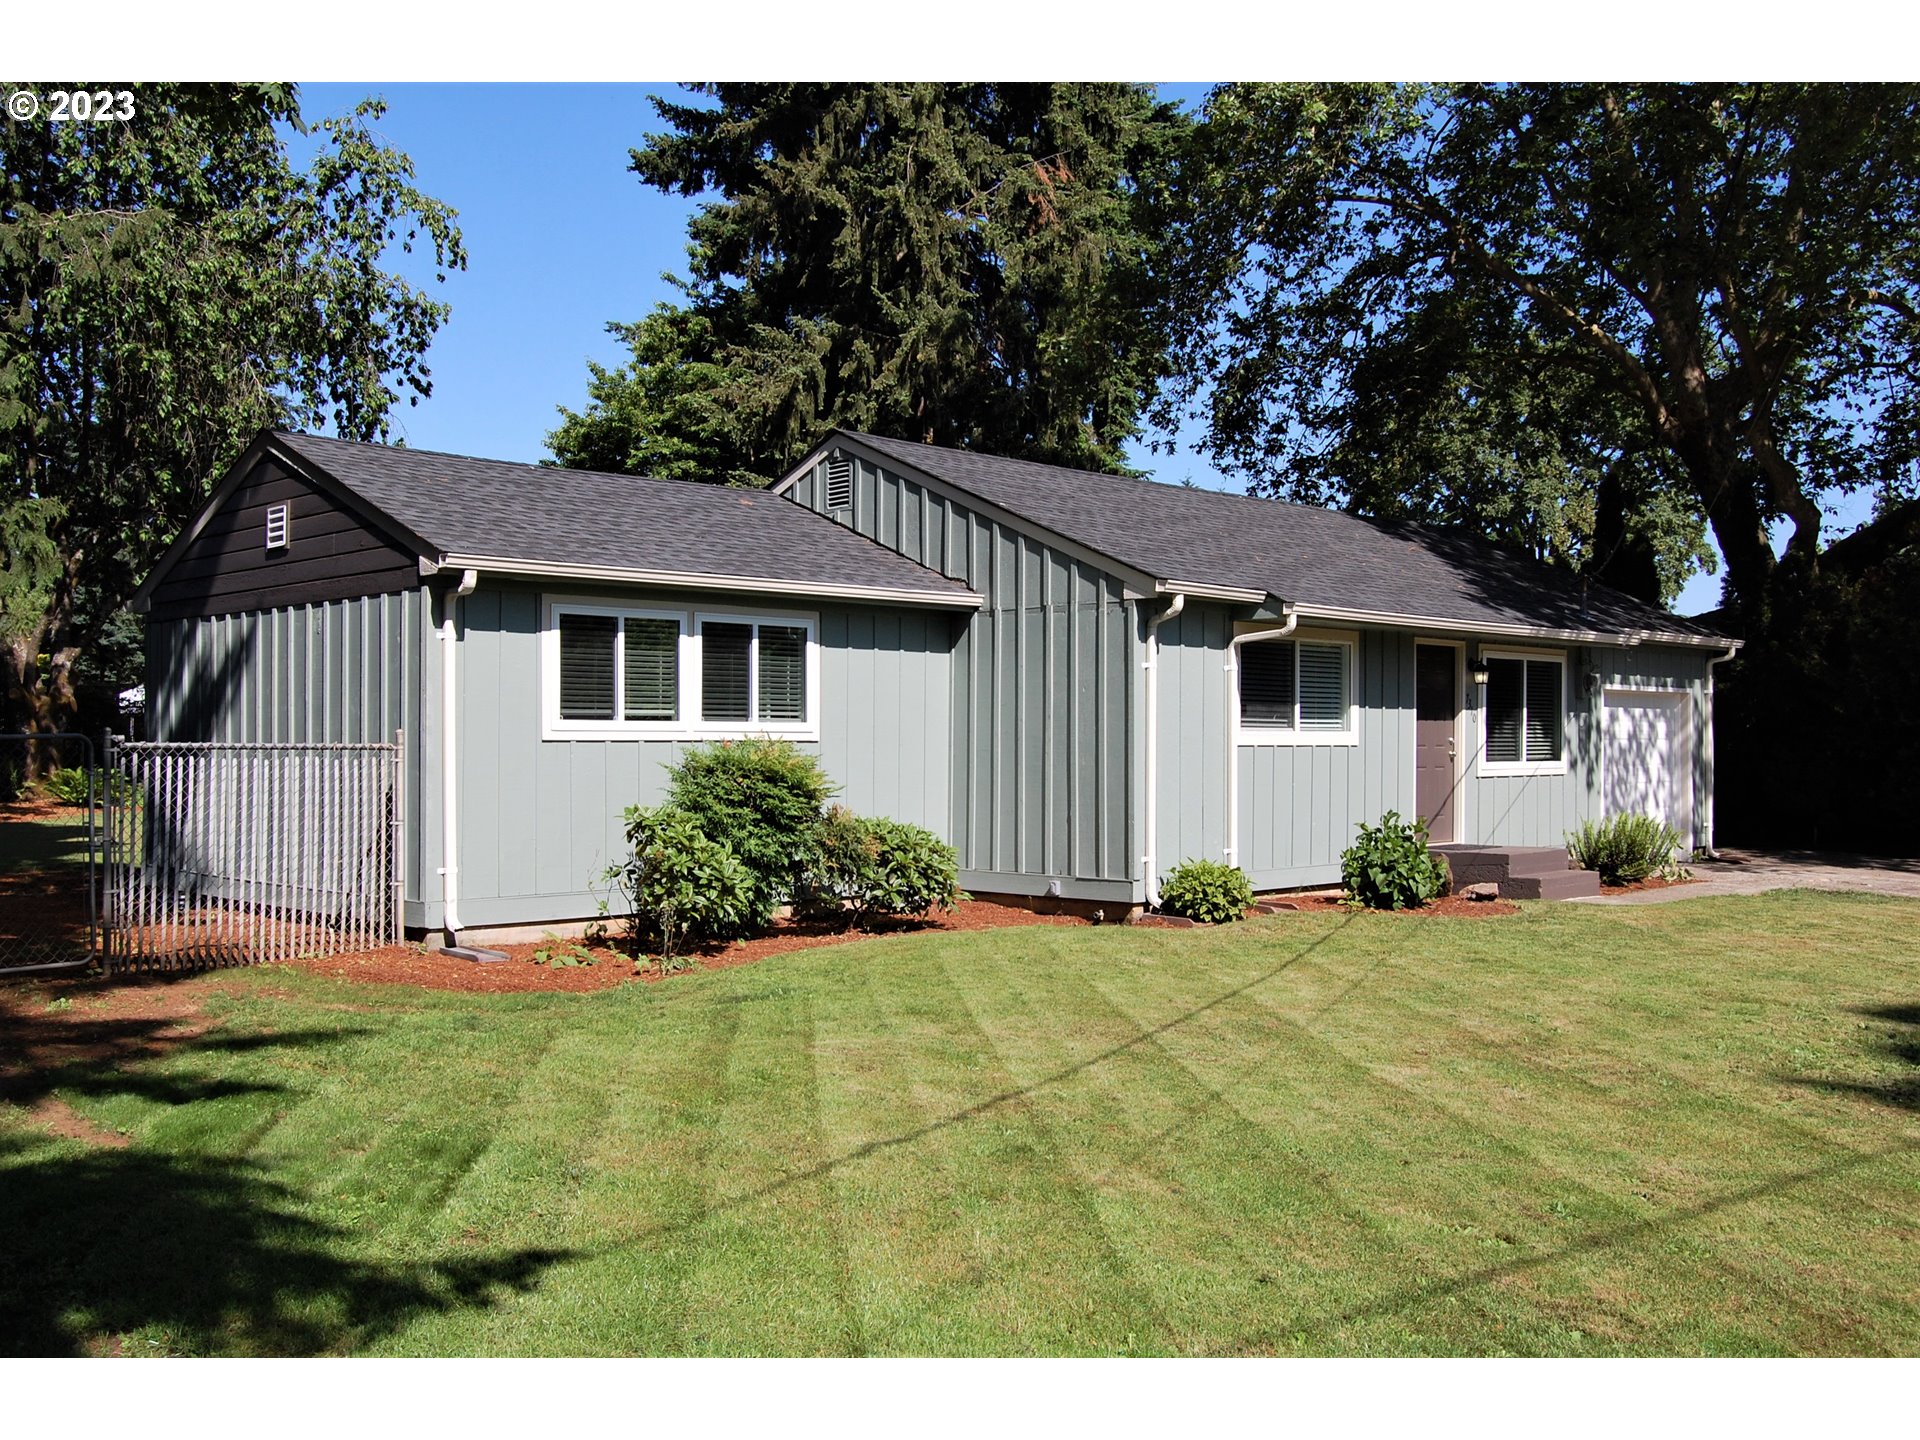 7310 NW 11TH AVE, Vancouver, WA 98665